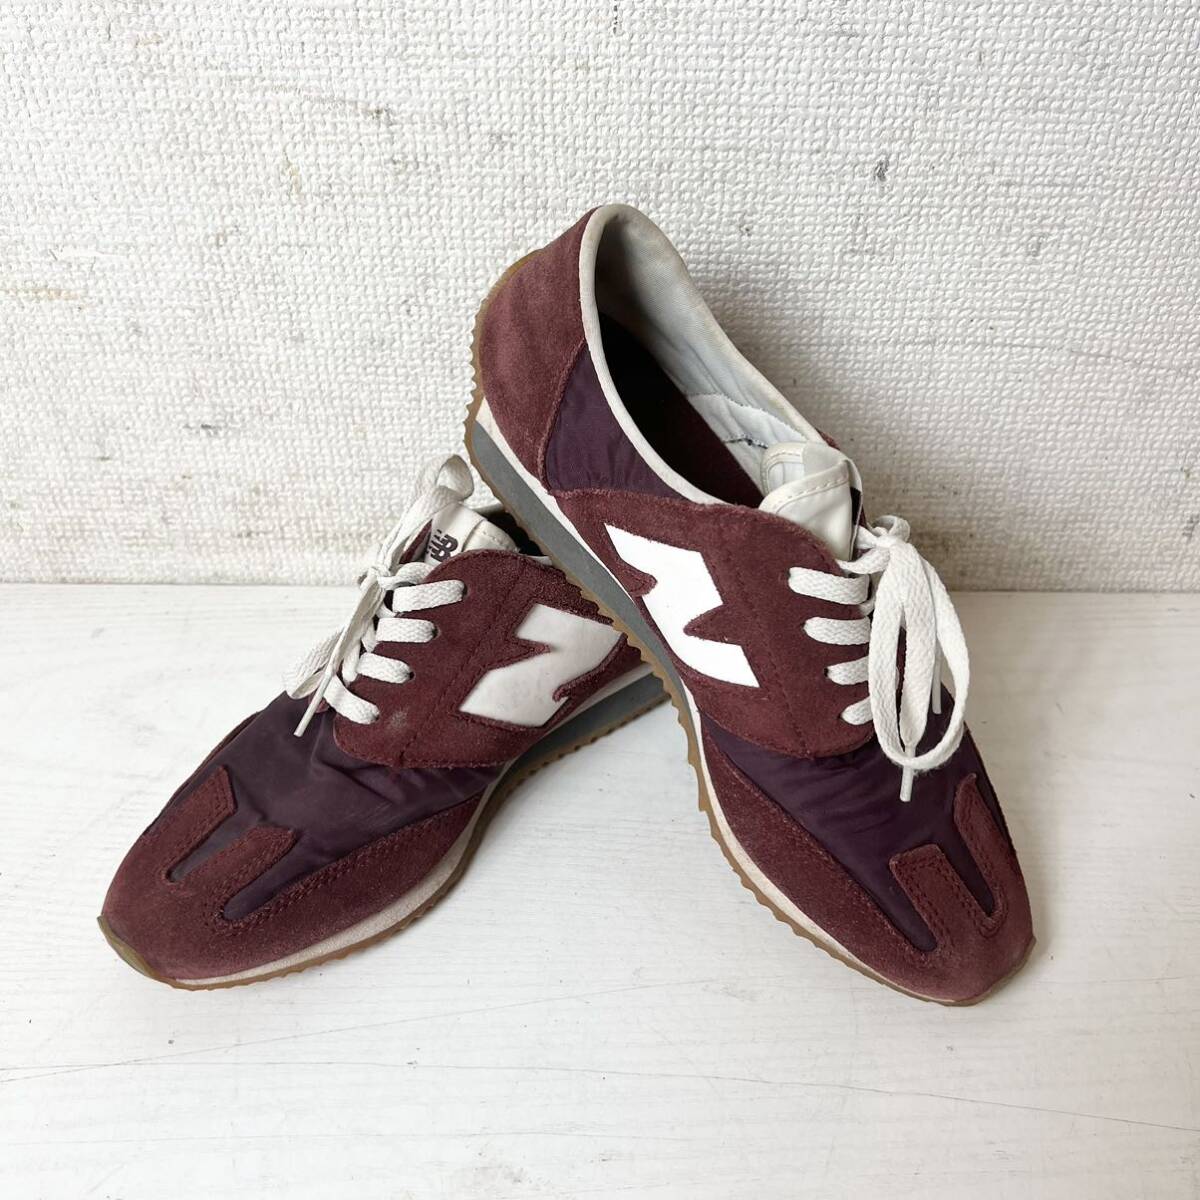 234* secondhand goods NEW BALANCE New balance sneakers 24.5cm suede U320AE shoes present condition goods *